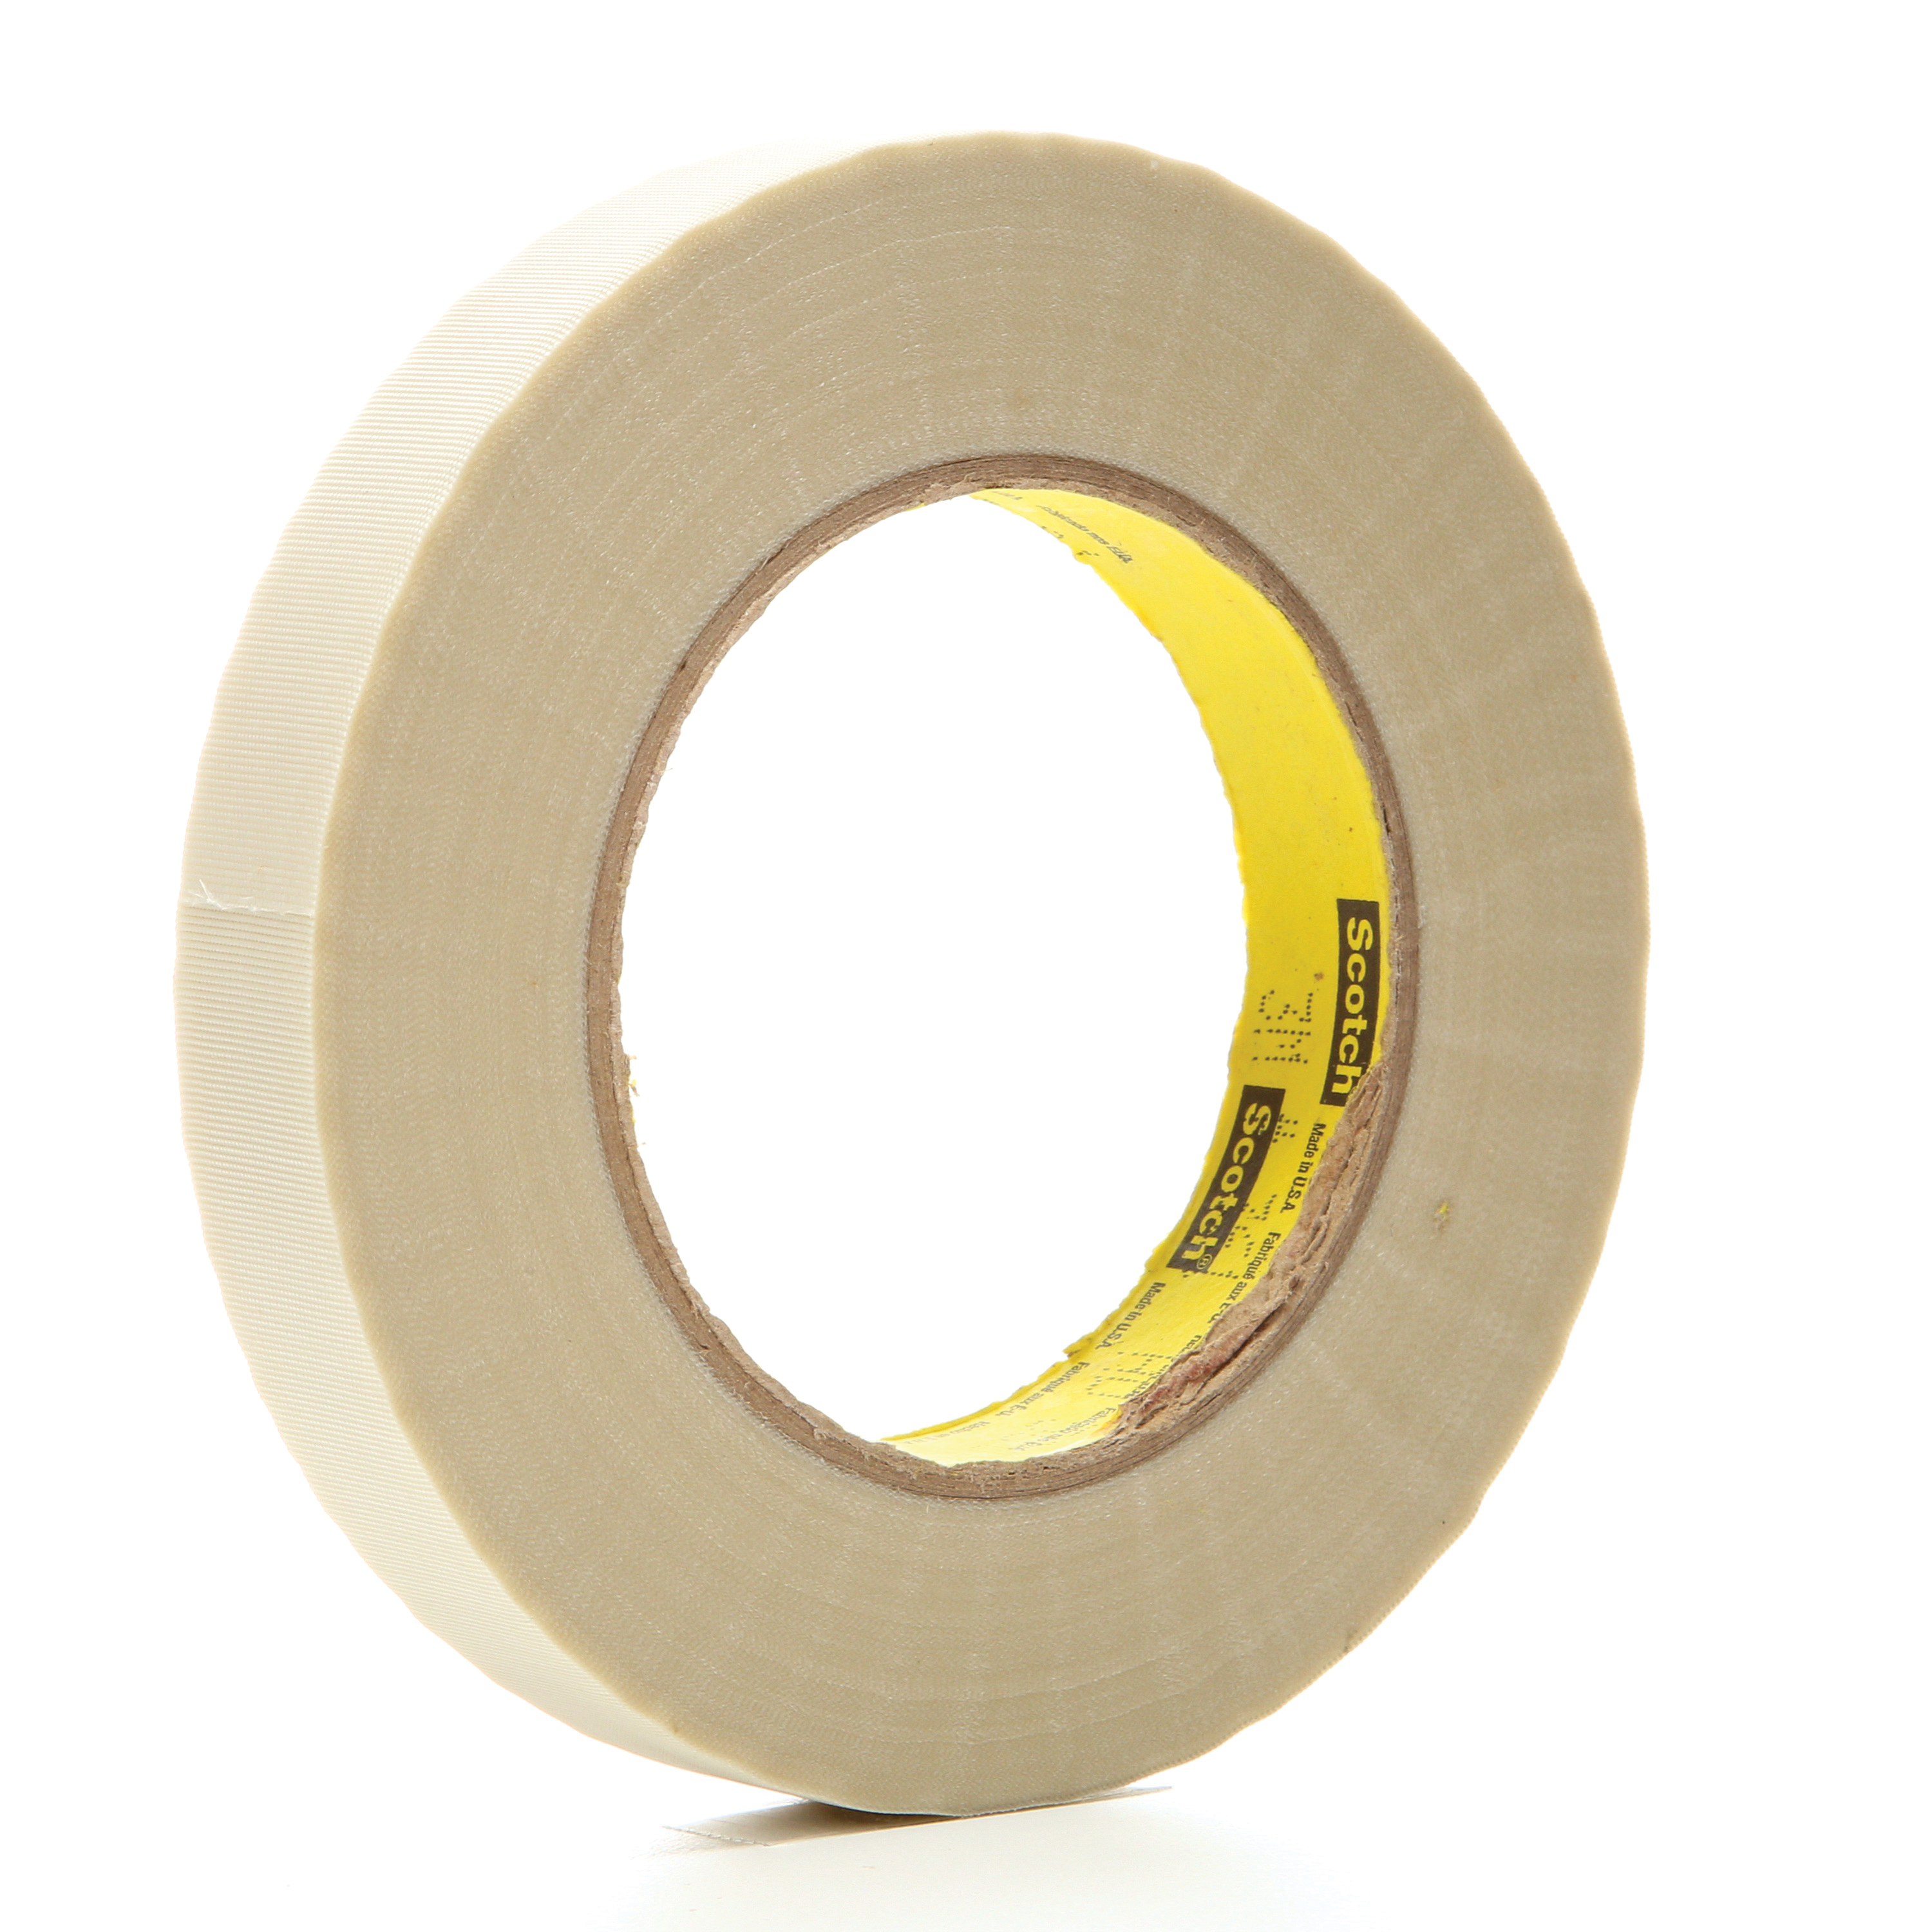 3M™ 021200-03016 Cloth Tape, 60 yd L x 3/4 in W, 6.4 mil THK, Silicon Adhesive, Glass Cloth Backing, White